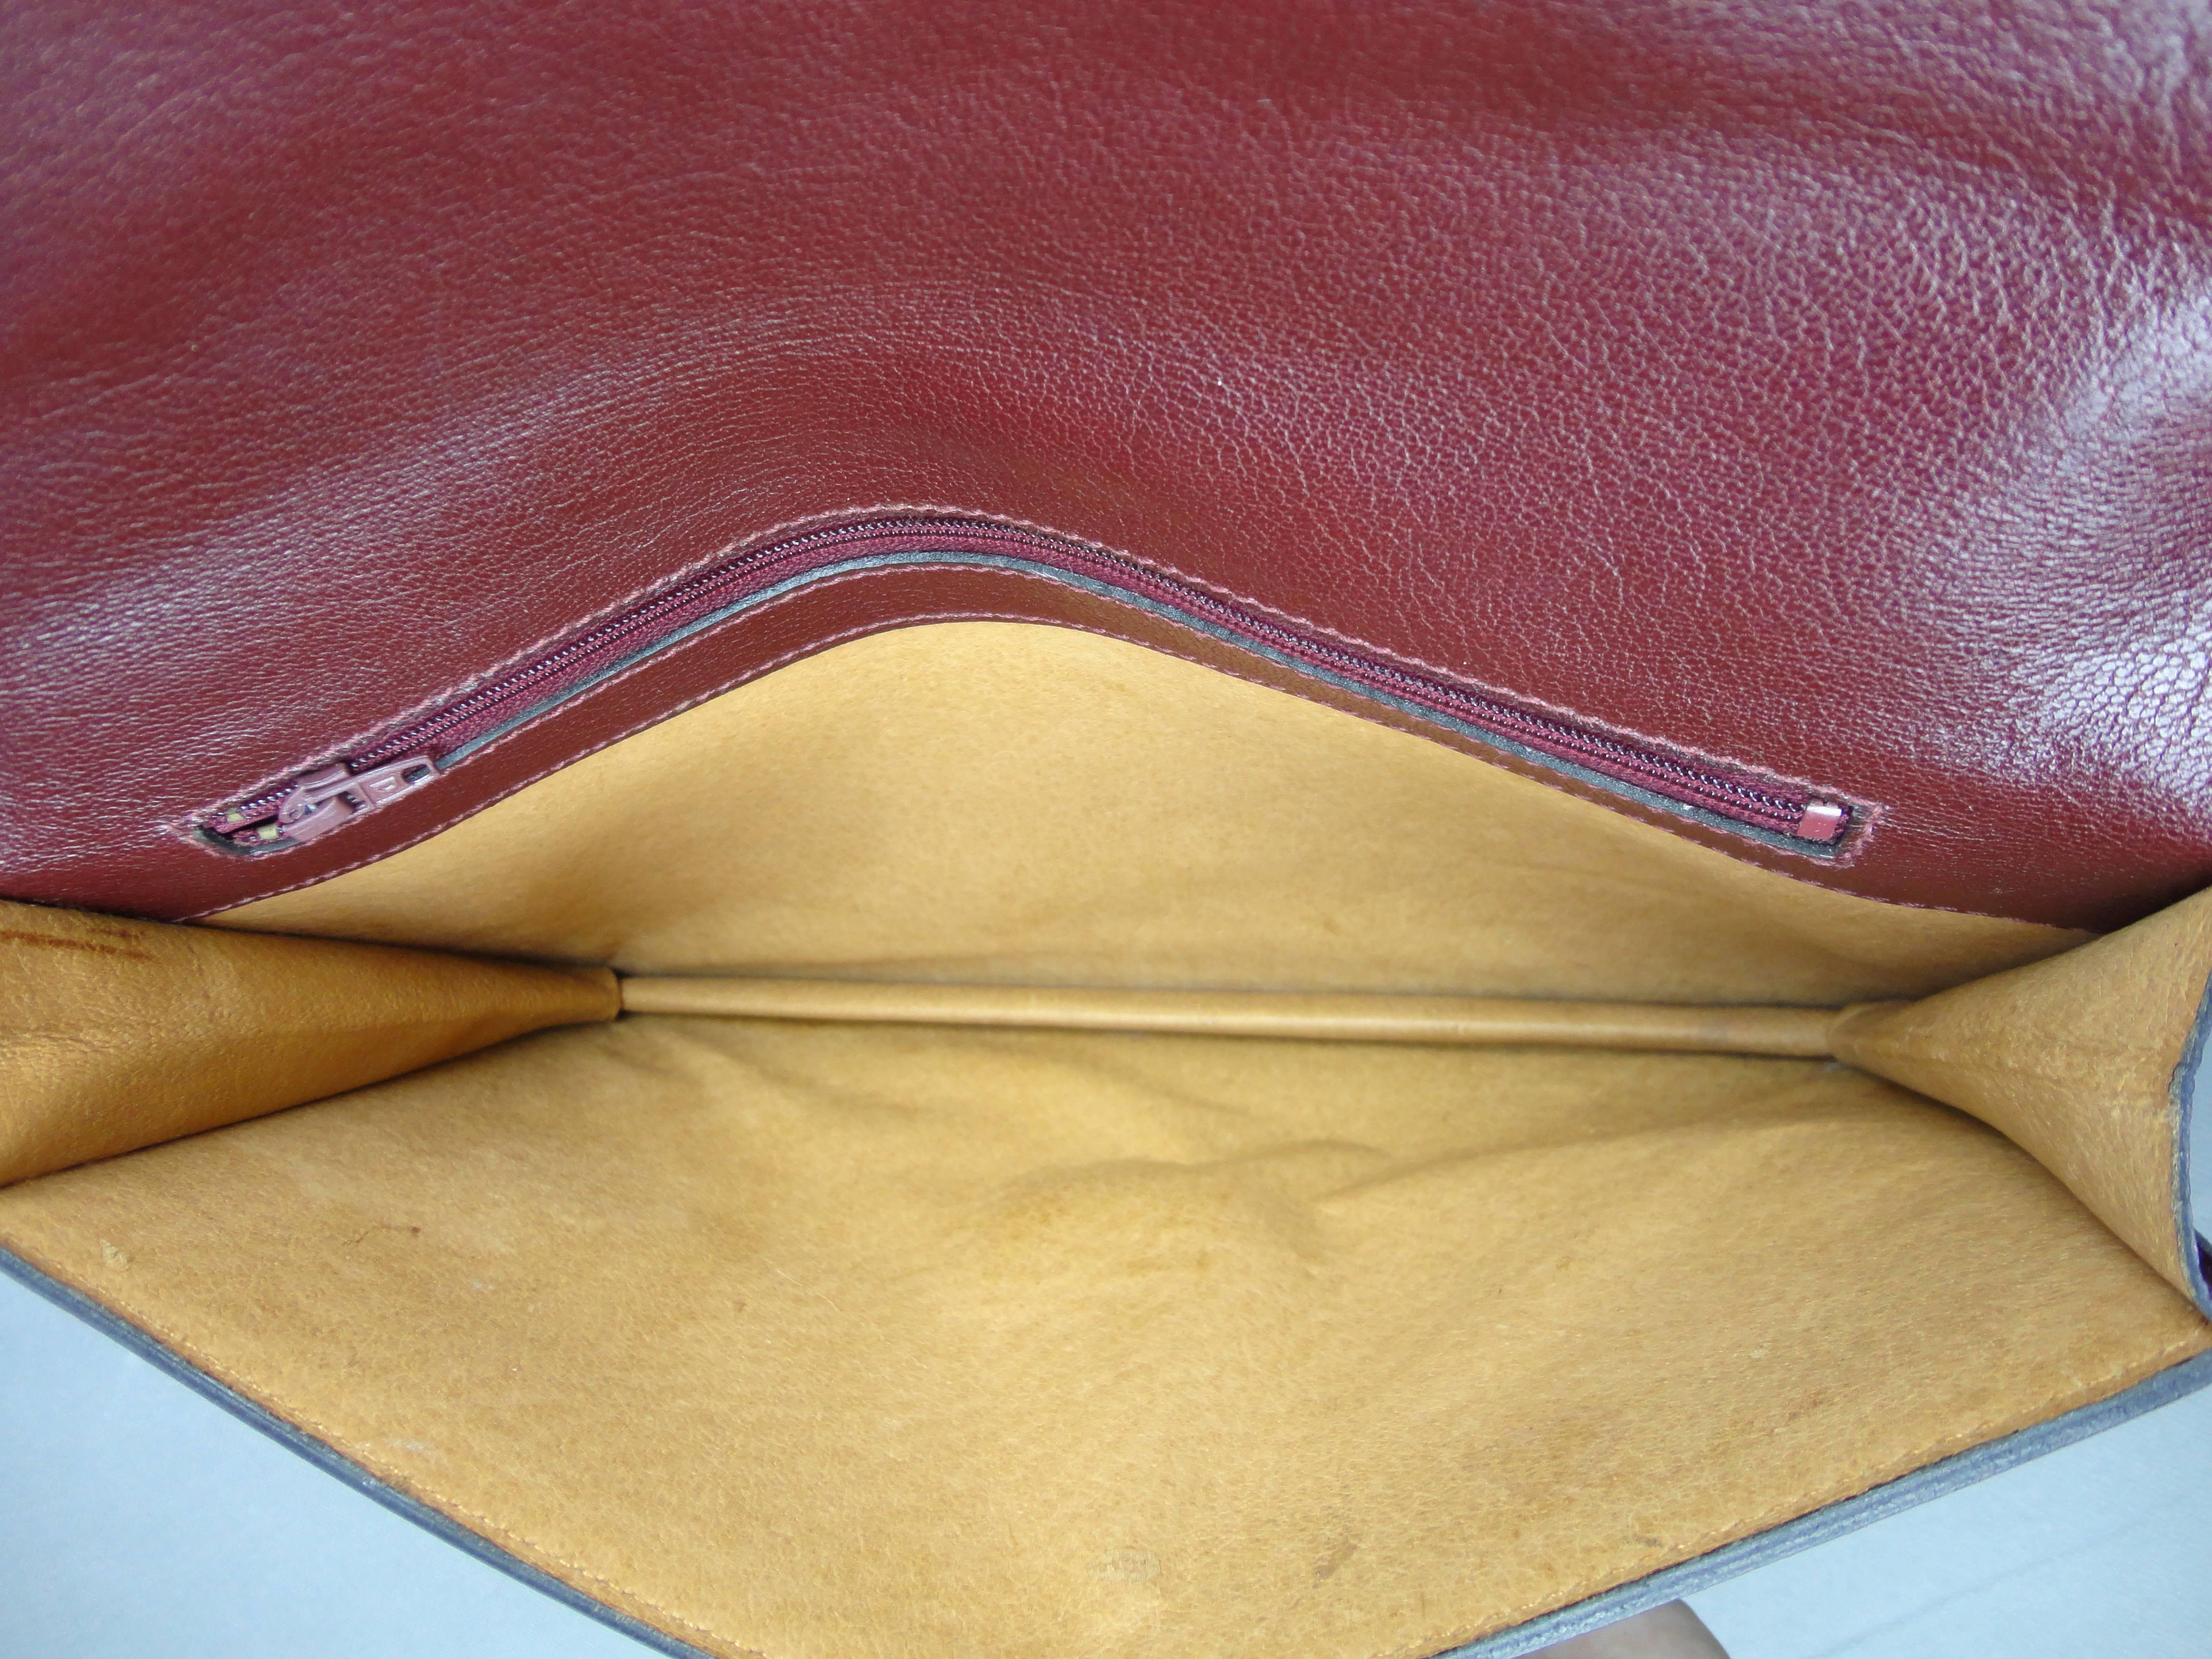 Hard to find Celine vintage clutch bag, in burgundy leather.

Amazing pre-loved condition, showing no marks on the leather, nor inside.

Sold with box and ribbon.

Dimensions:
Width: 26 cm
Height: 18 cm
Depth: 4 cm